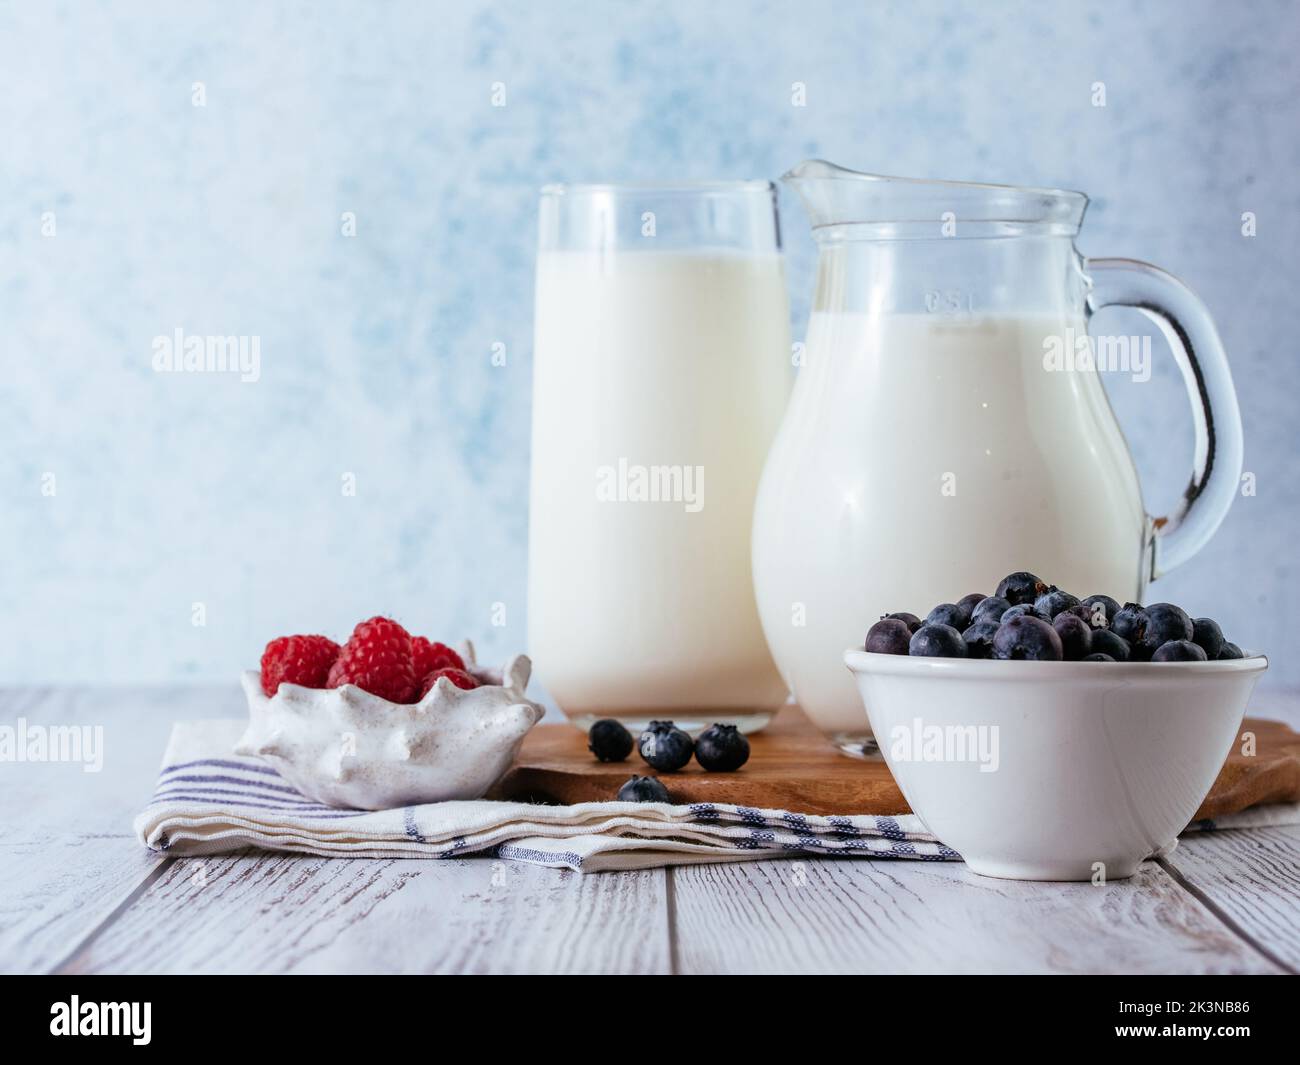 fresh milk in a glass jug and glass Stock Photo